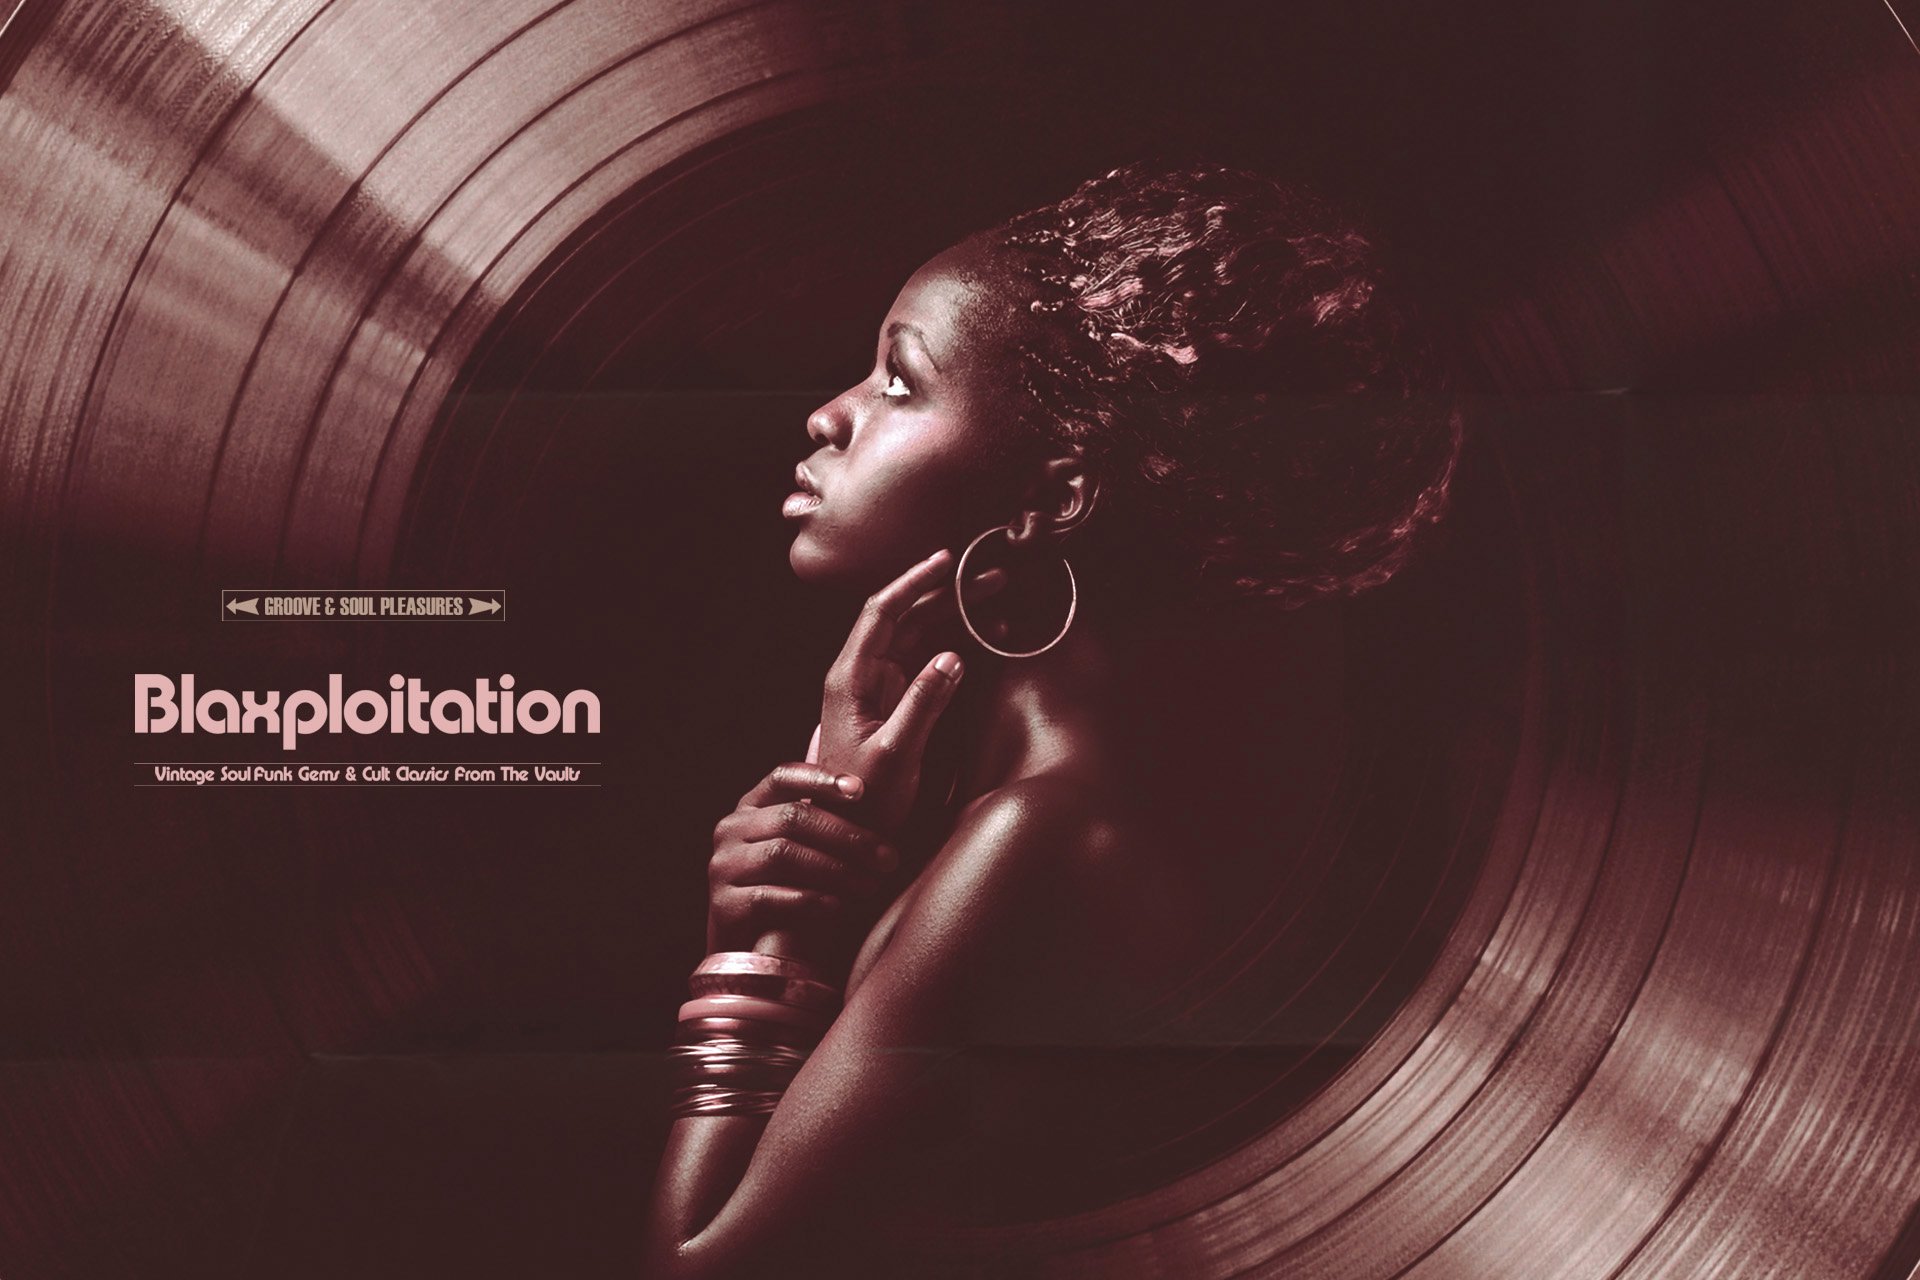 création groove and soul pleasure by Kart Gable | Graphiste Freelance